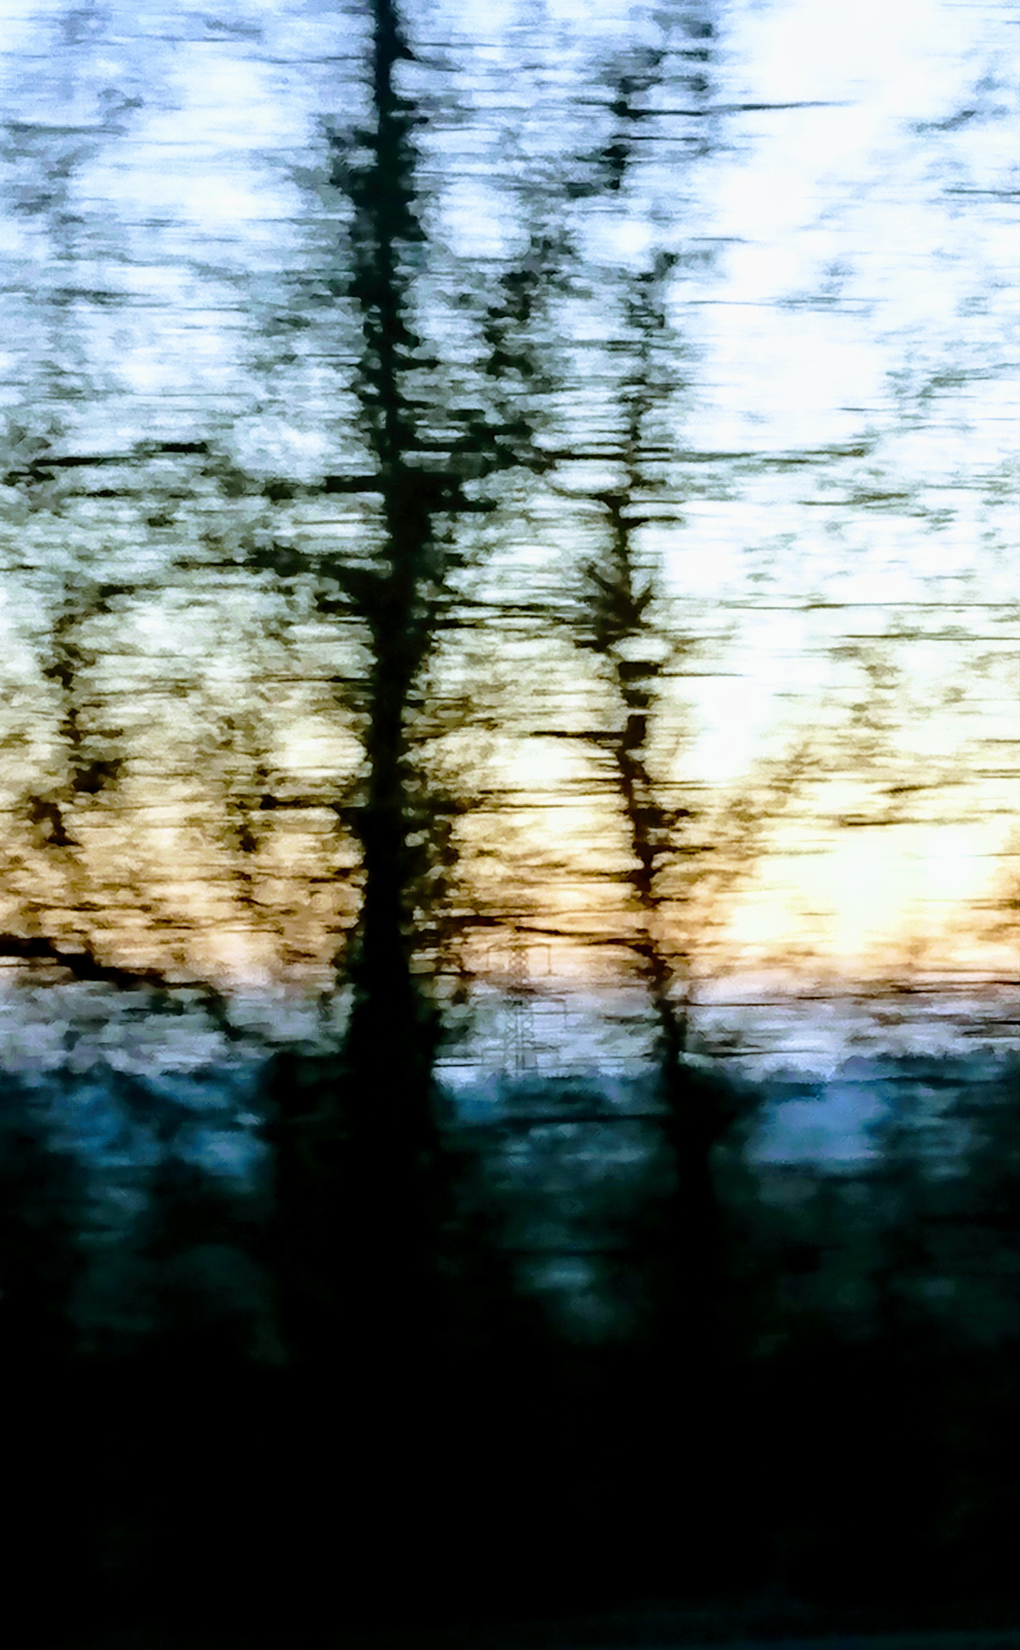 A wintery sunset taken from a moving car on the M4. The trees were skeletal, disjointed and silhouetted against bands of deep blue landscape in foreground, paler blue background and golden yellow sky. A faint Pylon can be seen through the trees Turned out quite arty!